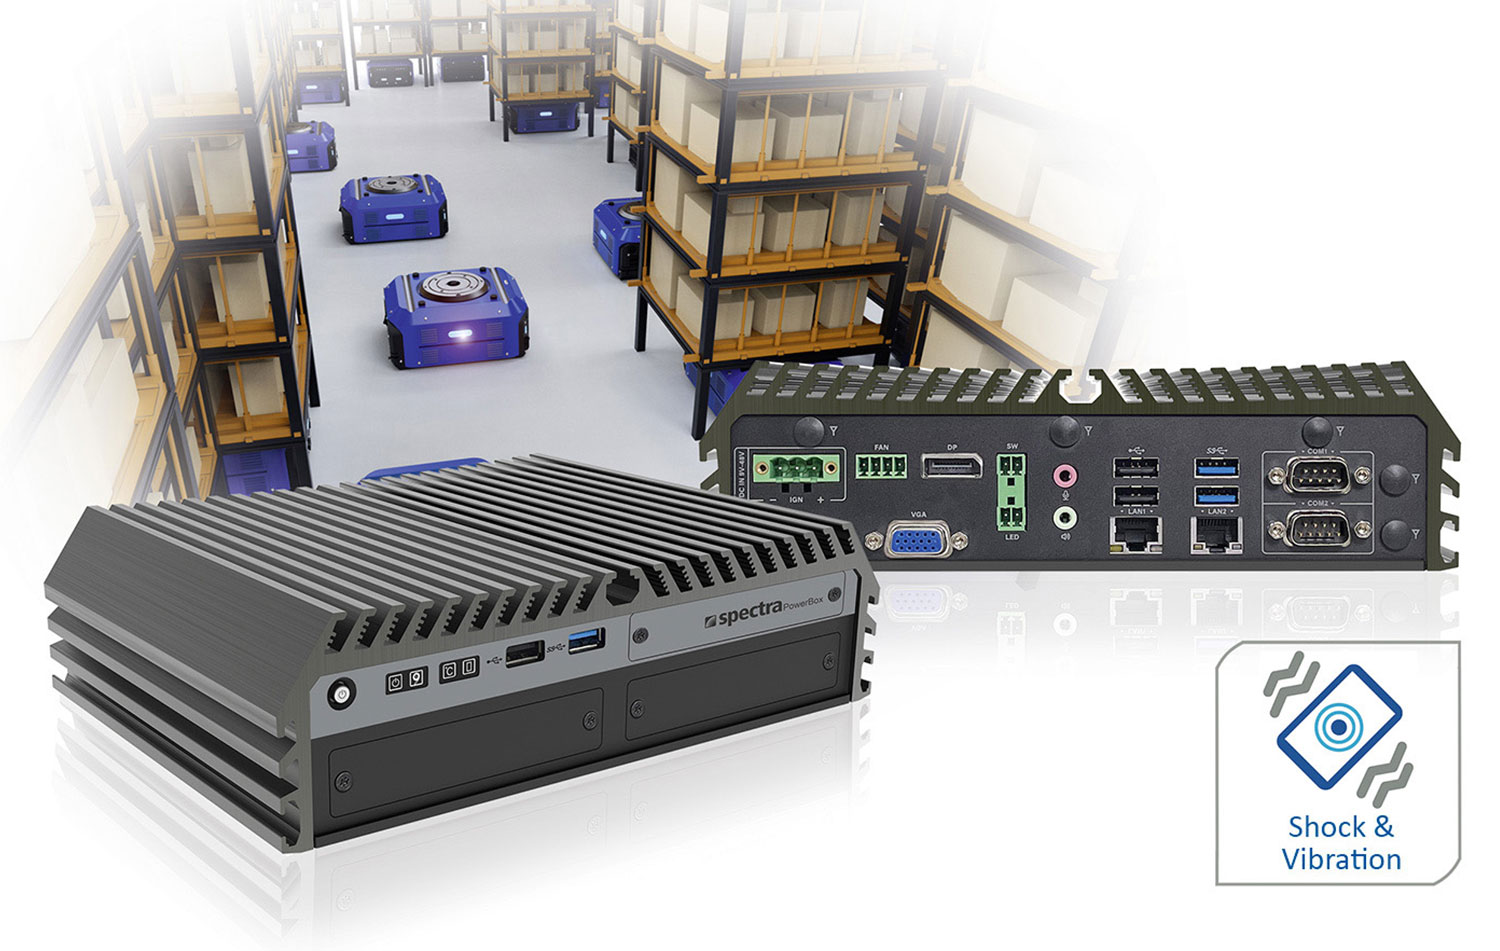 Very easy to customize: Spectra PowerBox 600: A compact embedded PC for a wide range of applications